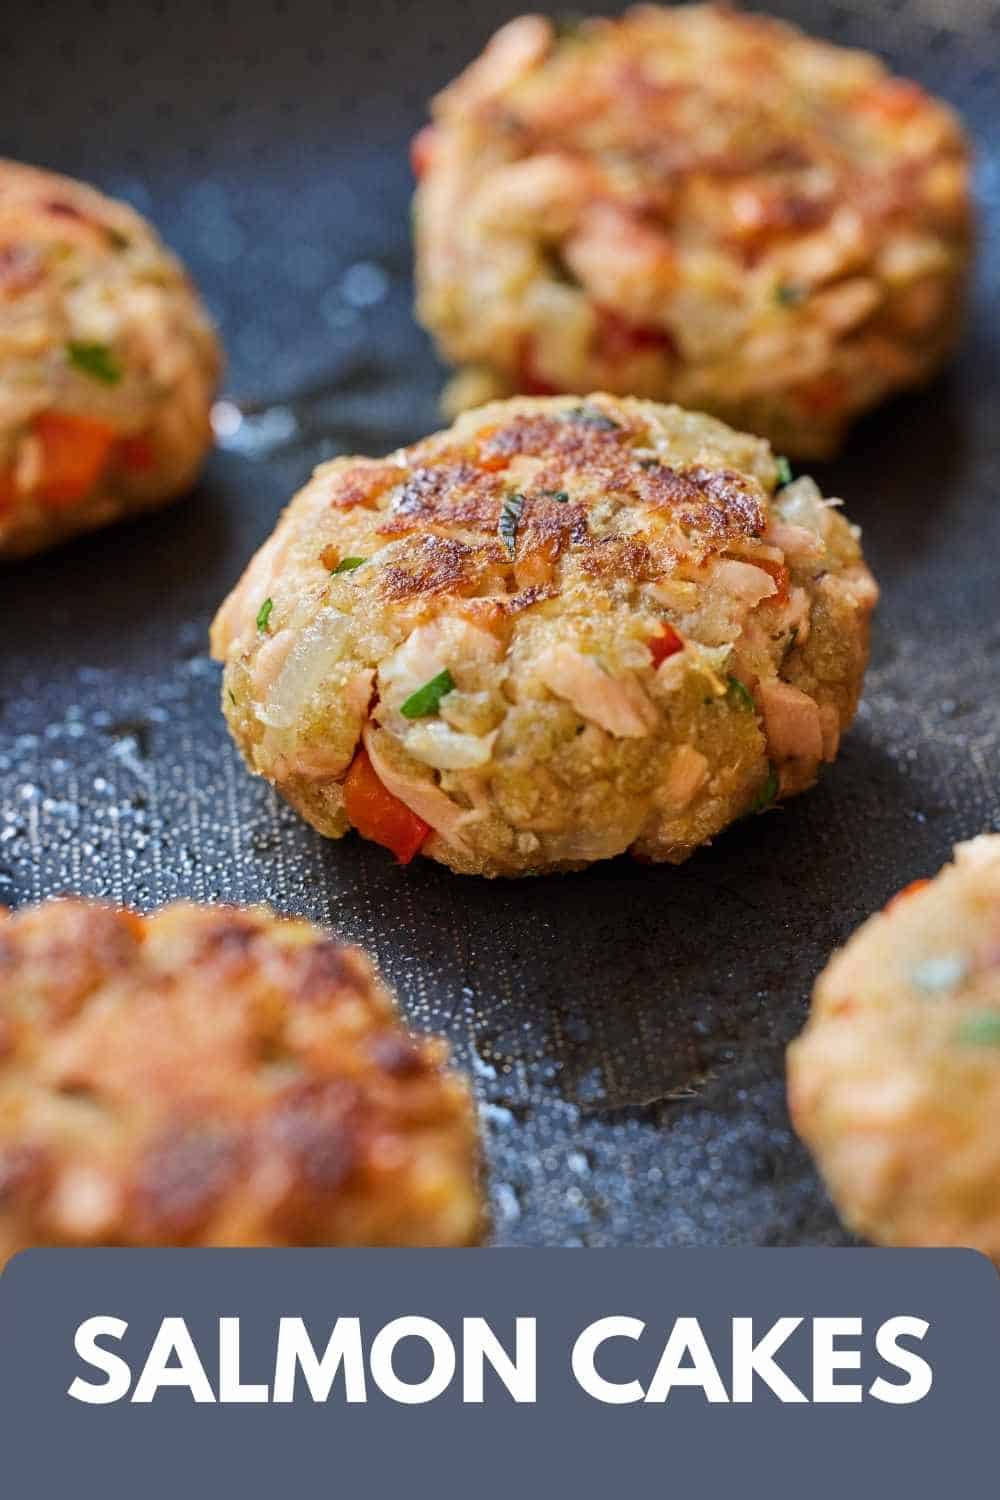 Salmon Cakes - Cooking With Coit